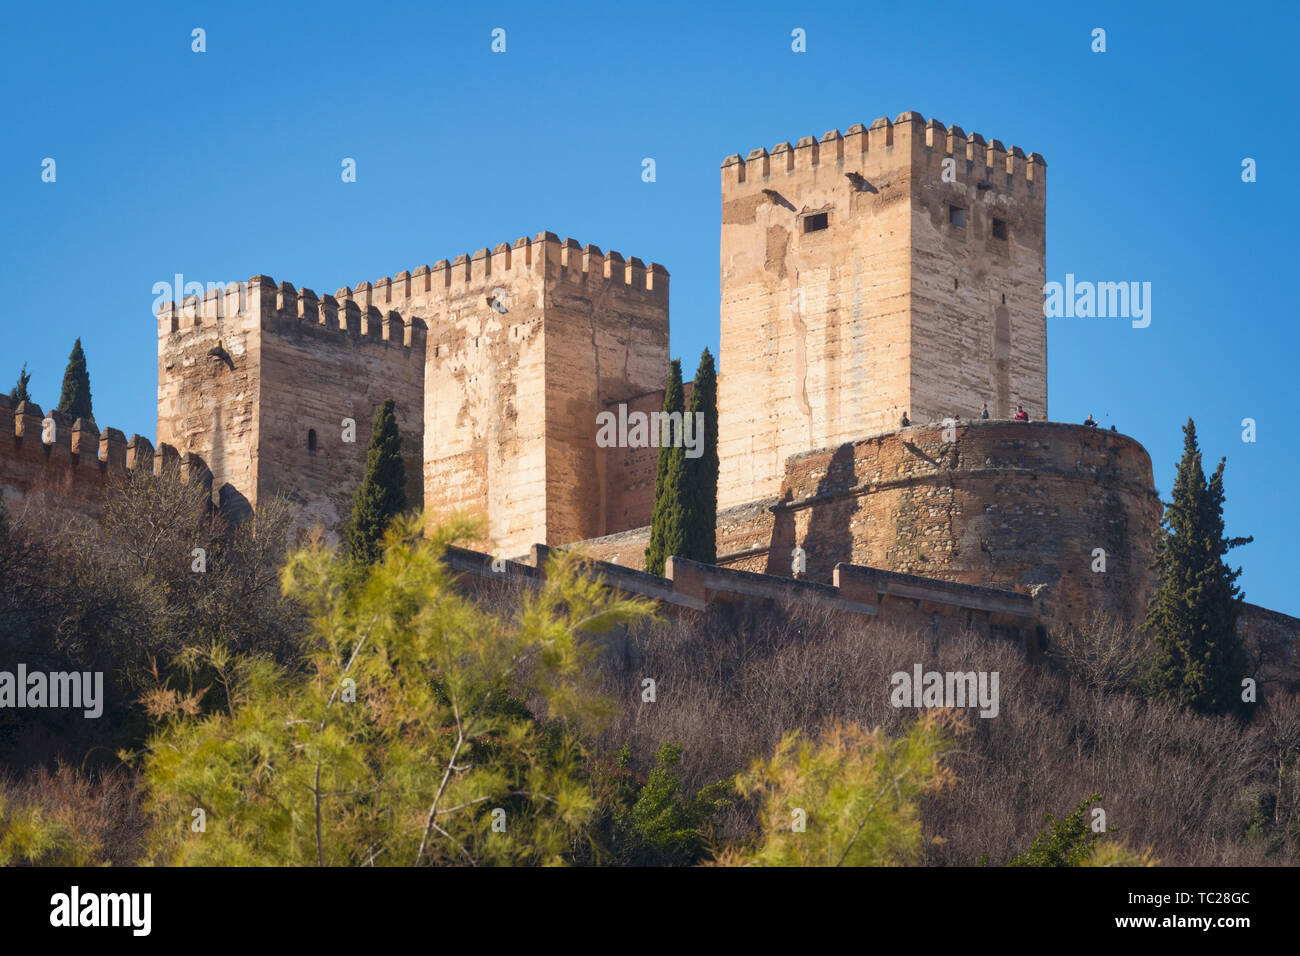 Looking up from the Darro to the Alcazaba, or Citadel of the Alhambra, Granada, Granada Province, Andalusia, southern Spain.  The Alhambra, Generalife Stock Photo